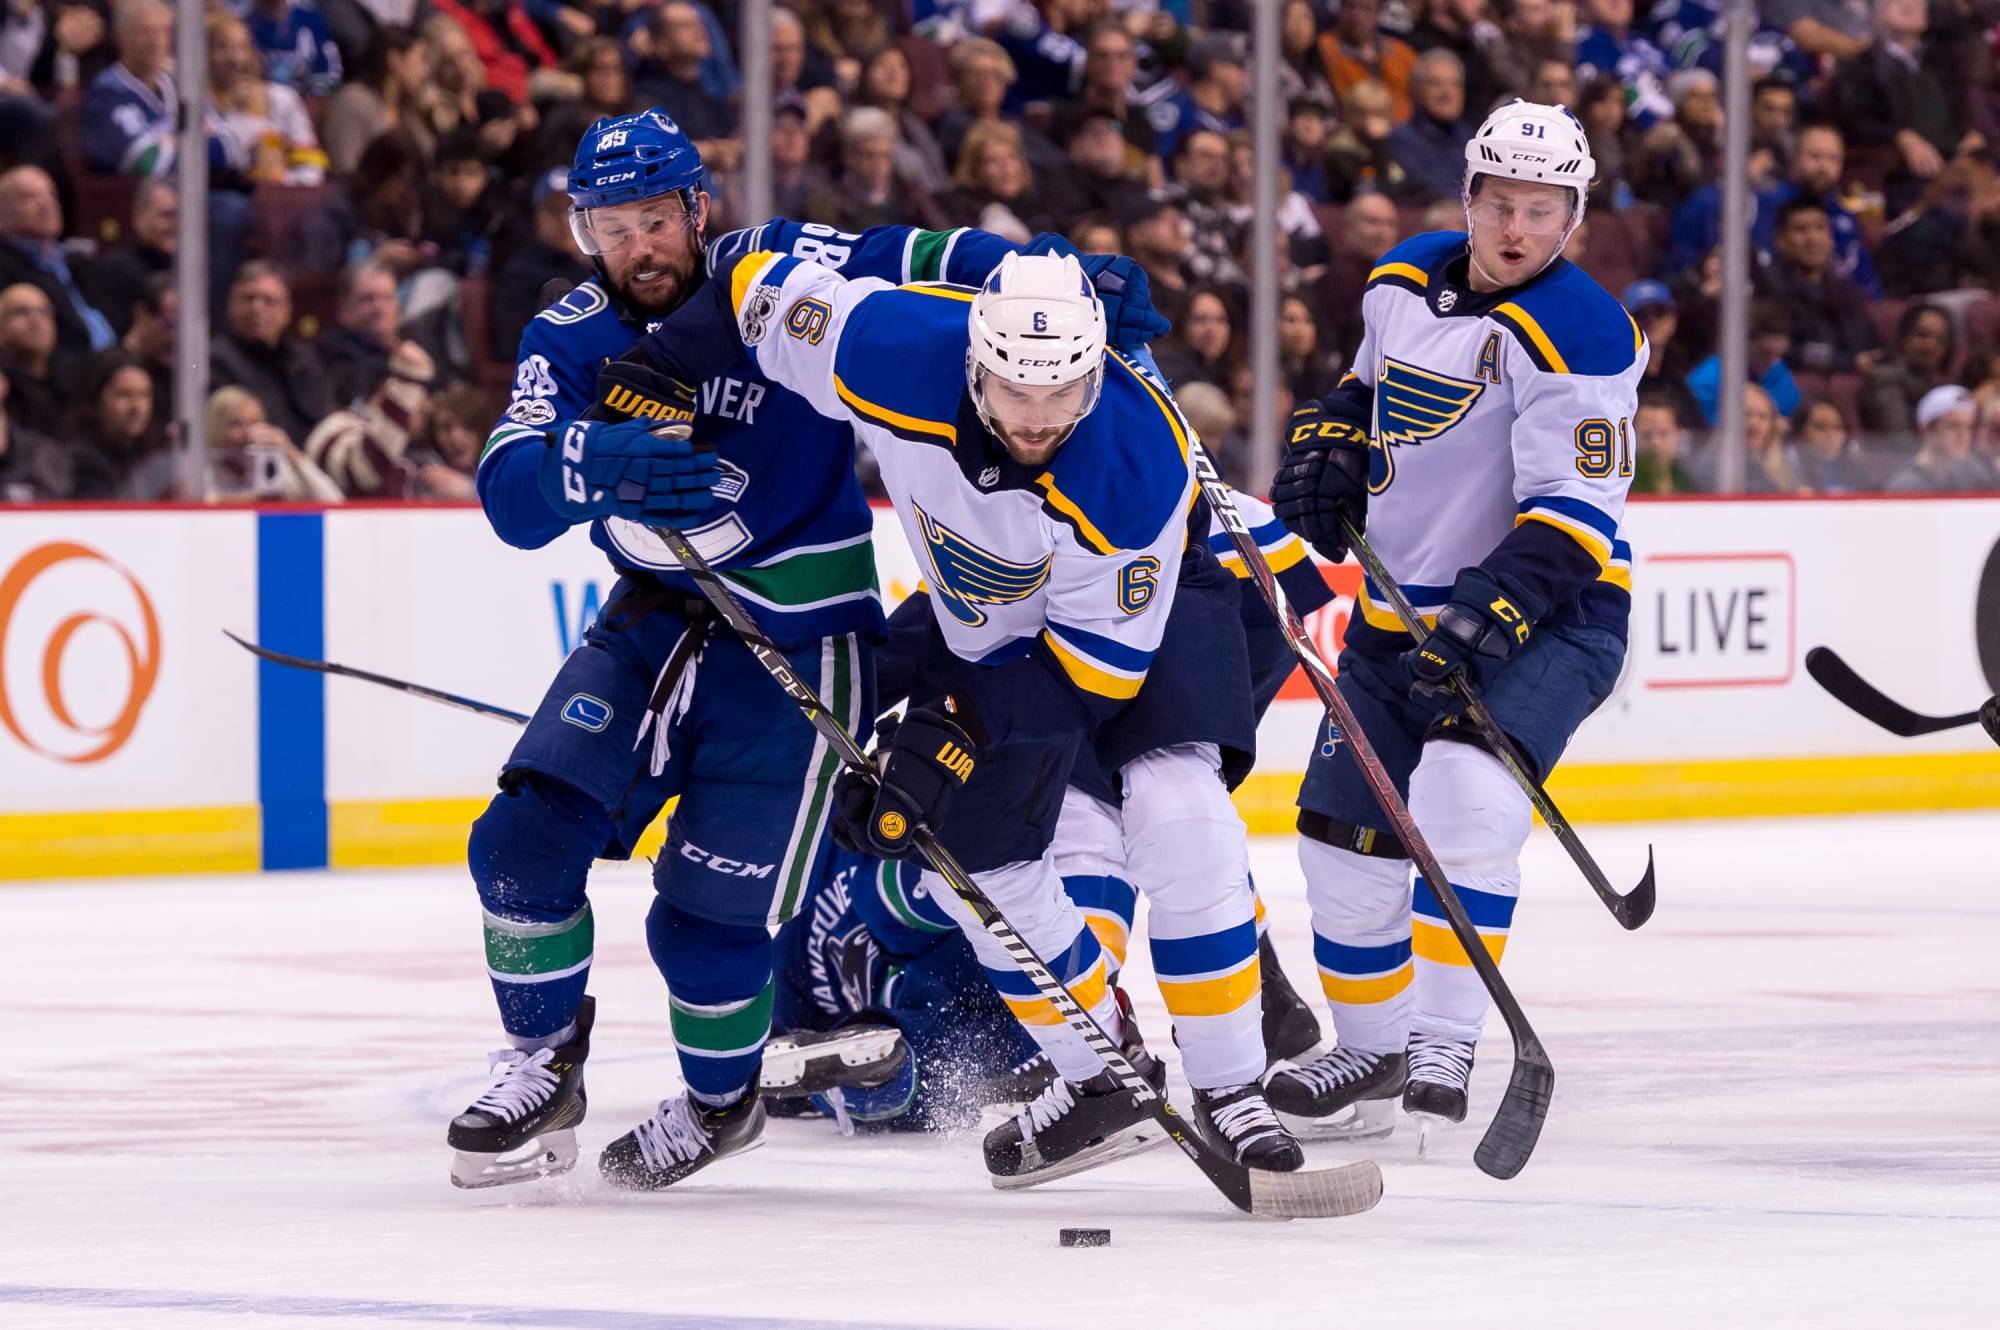 Vancouver Canucks 3 takeaways from overtime loss to Blues